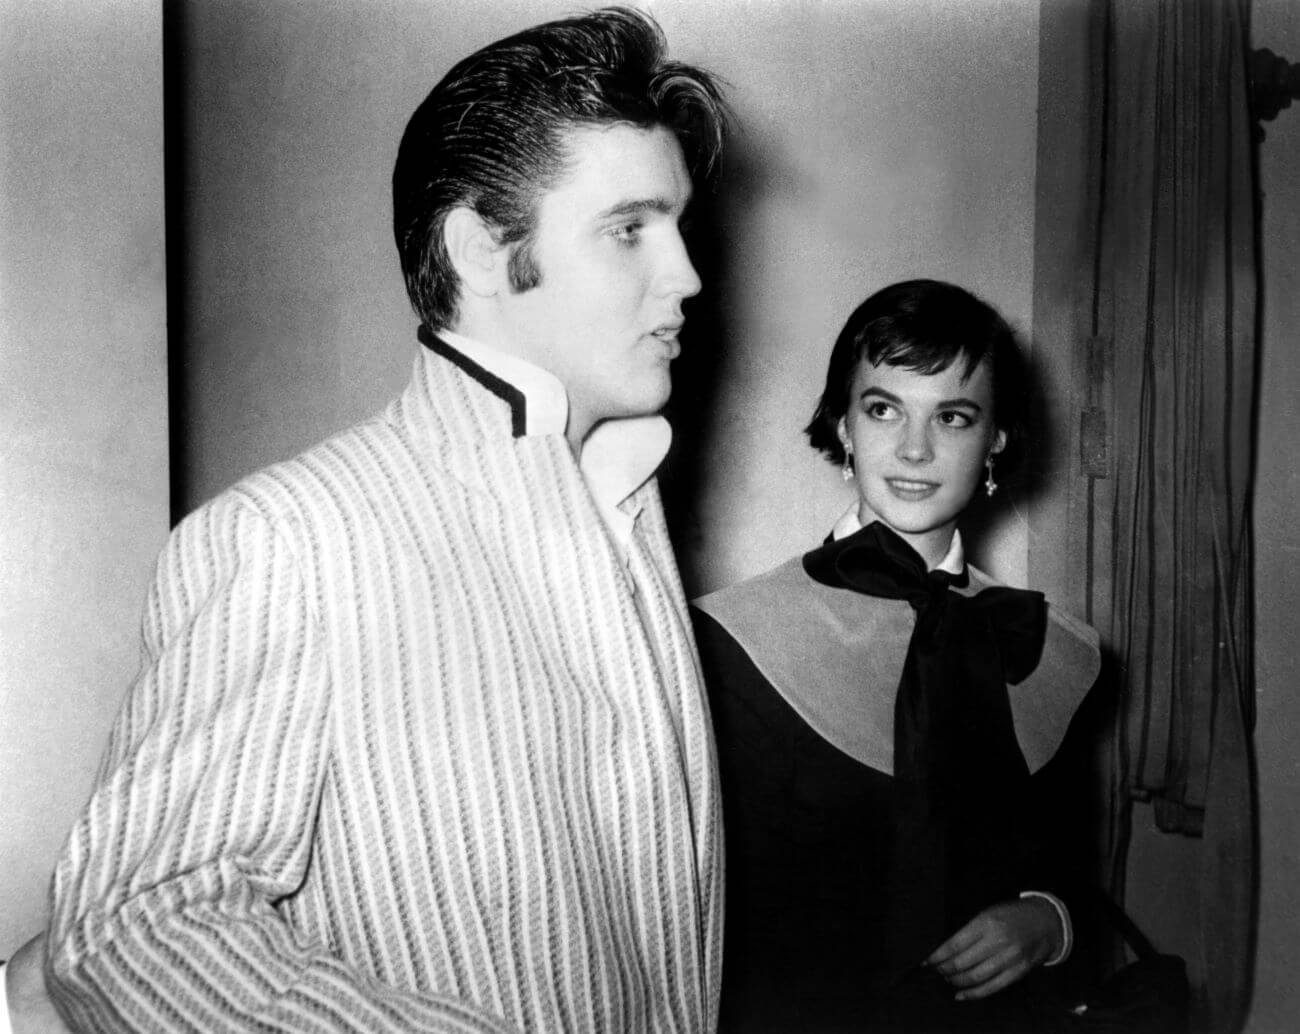 A black and white picture of Elvis standing in side profile and Natalie Wood looking up at him.